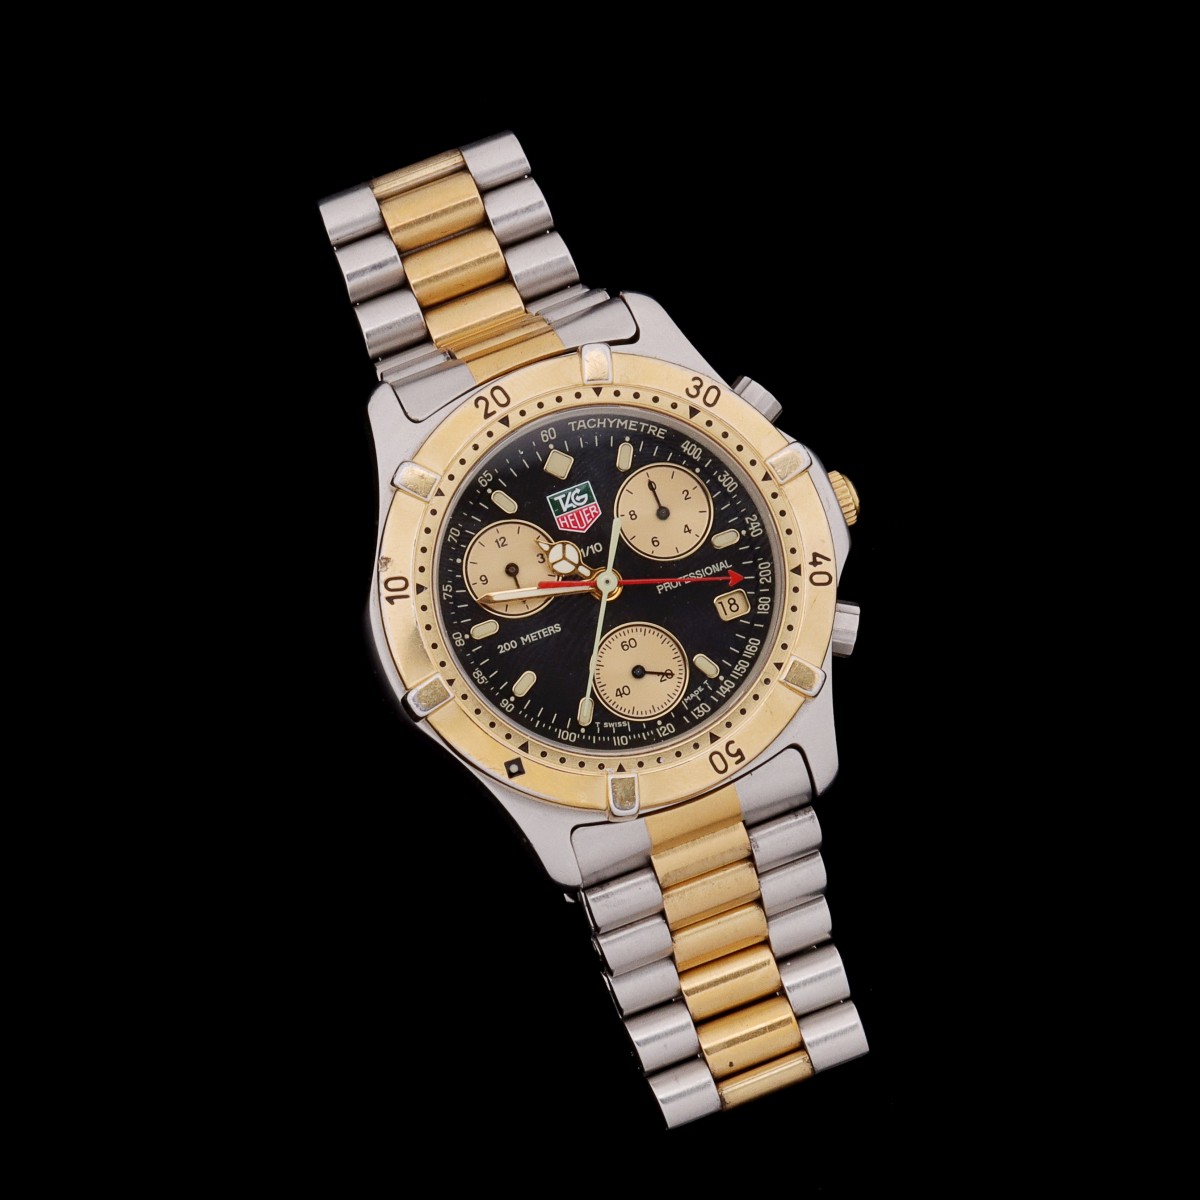 A TAG HEUER MEN'S STAINLESS STEEL CHRONOGRAPH